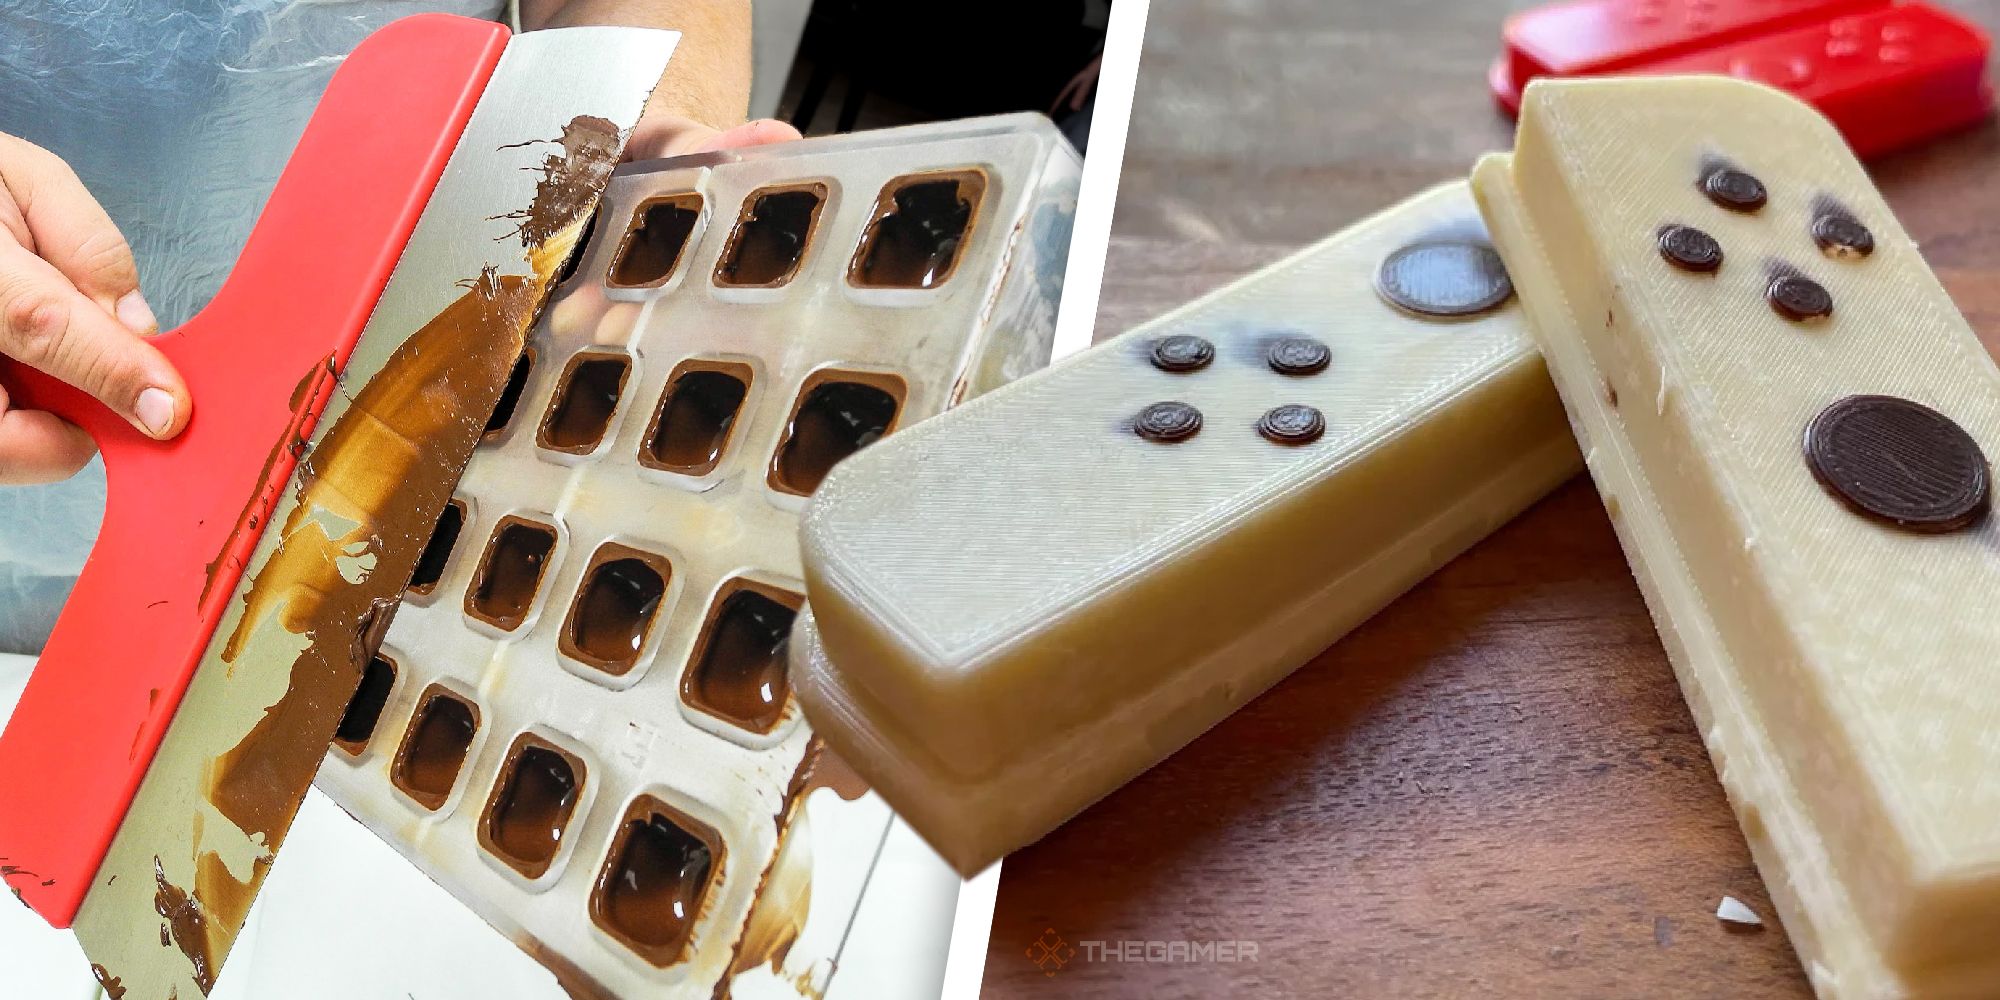 a chocolate mold and a nintendo switch joy-con made of chocolate